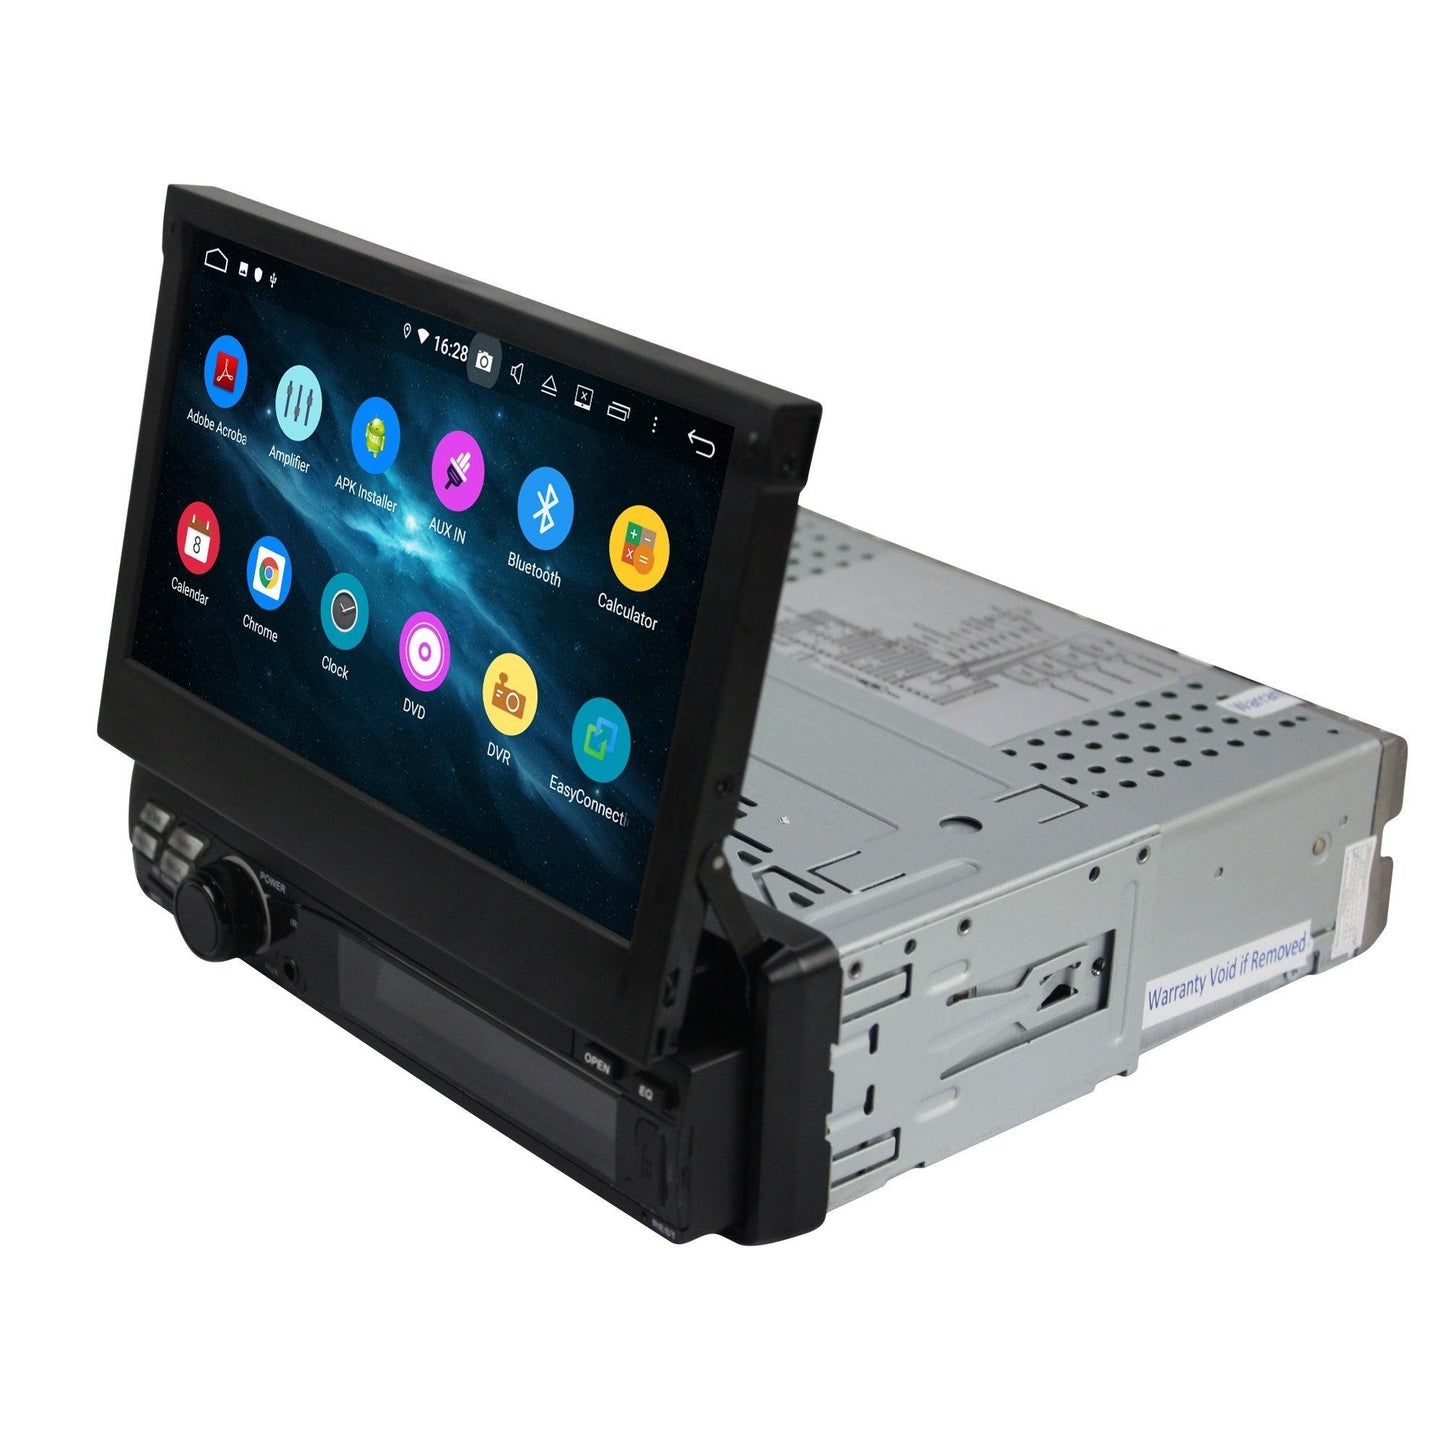 One Din 7" Six-core Eight-core Android 10.0 OEM Navigation Universa Radio - Smart Car Stereo Radio Navigation | In-Dash audio/video players online - Phoenix Automotive